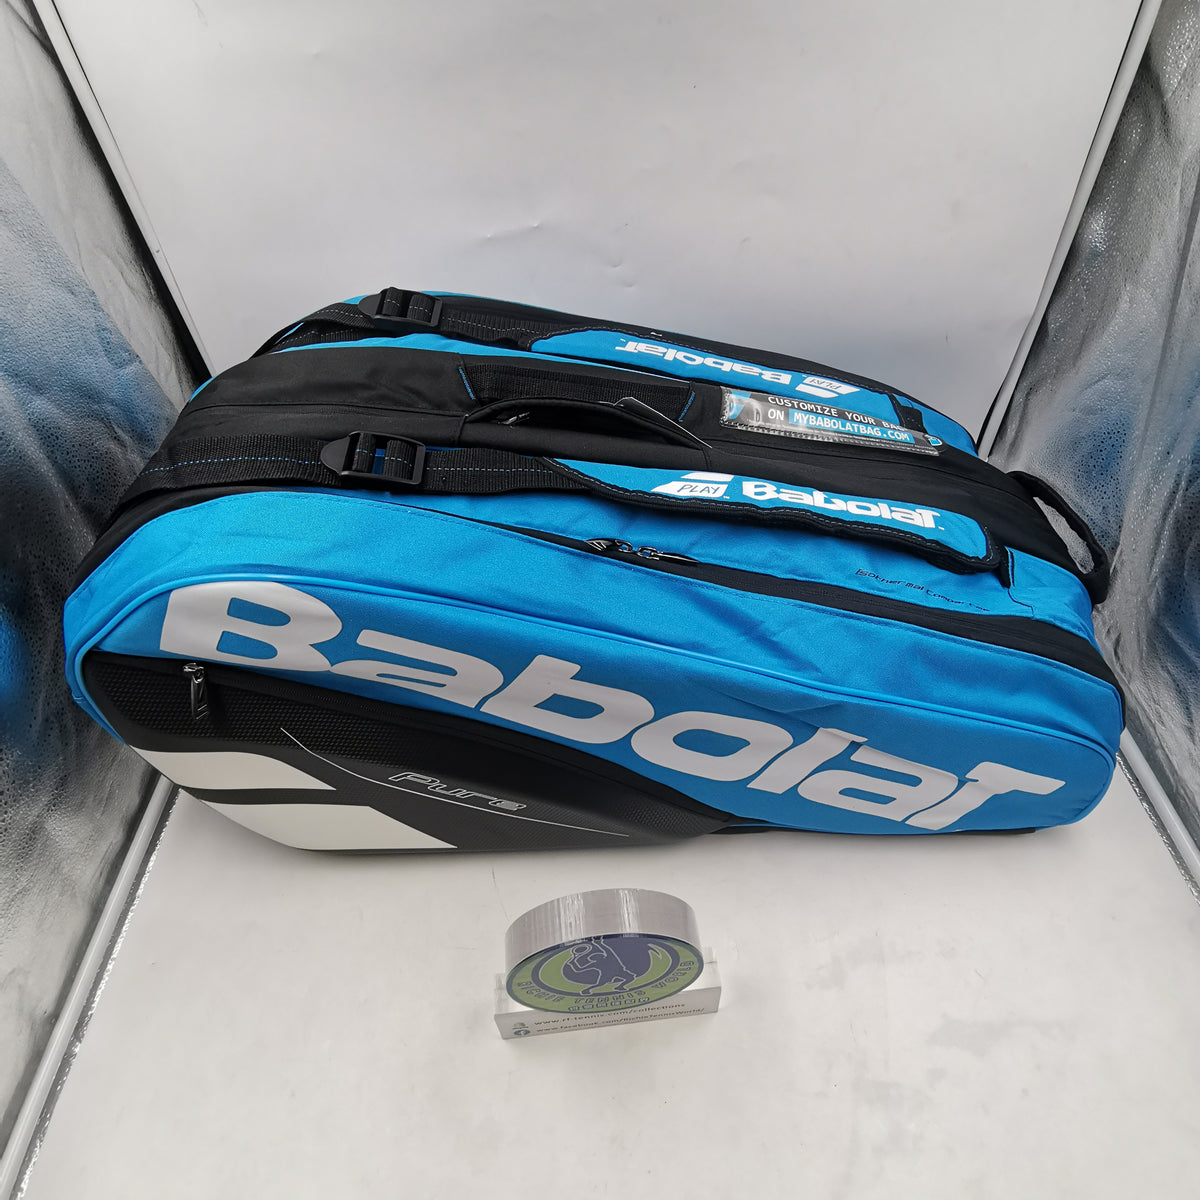 Babolat Pure Drive Racquet Holder x12 Bag Review 